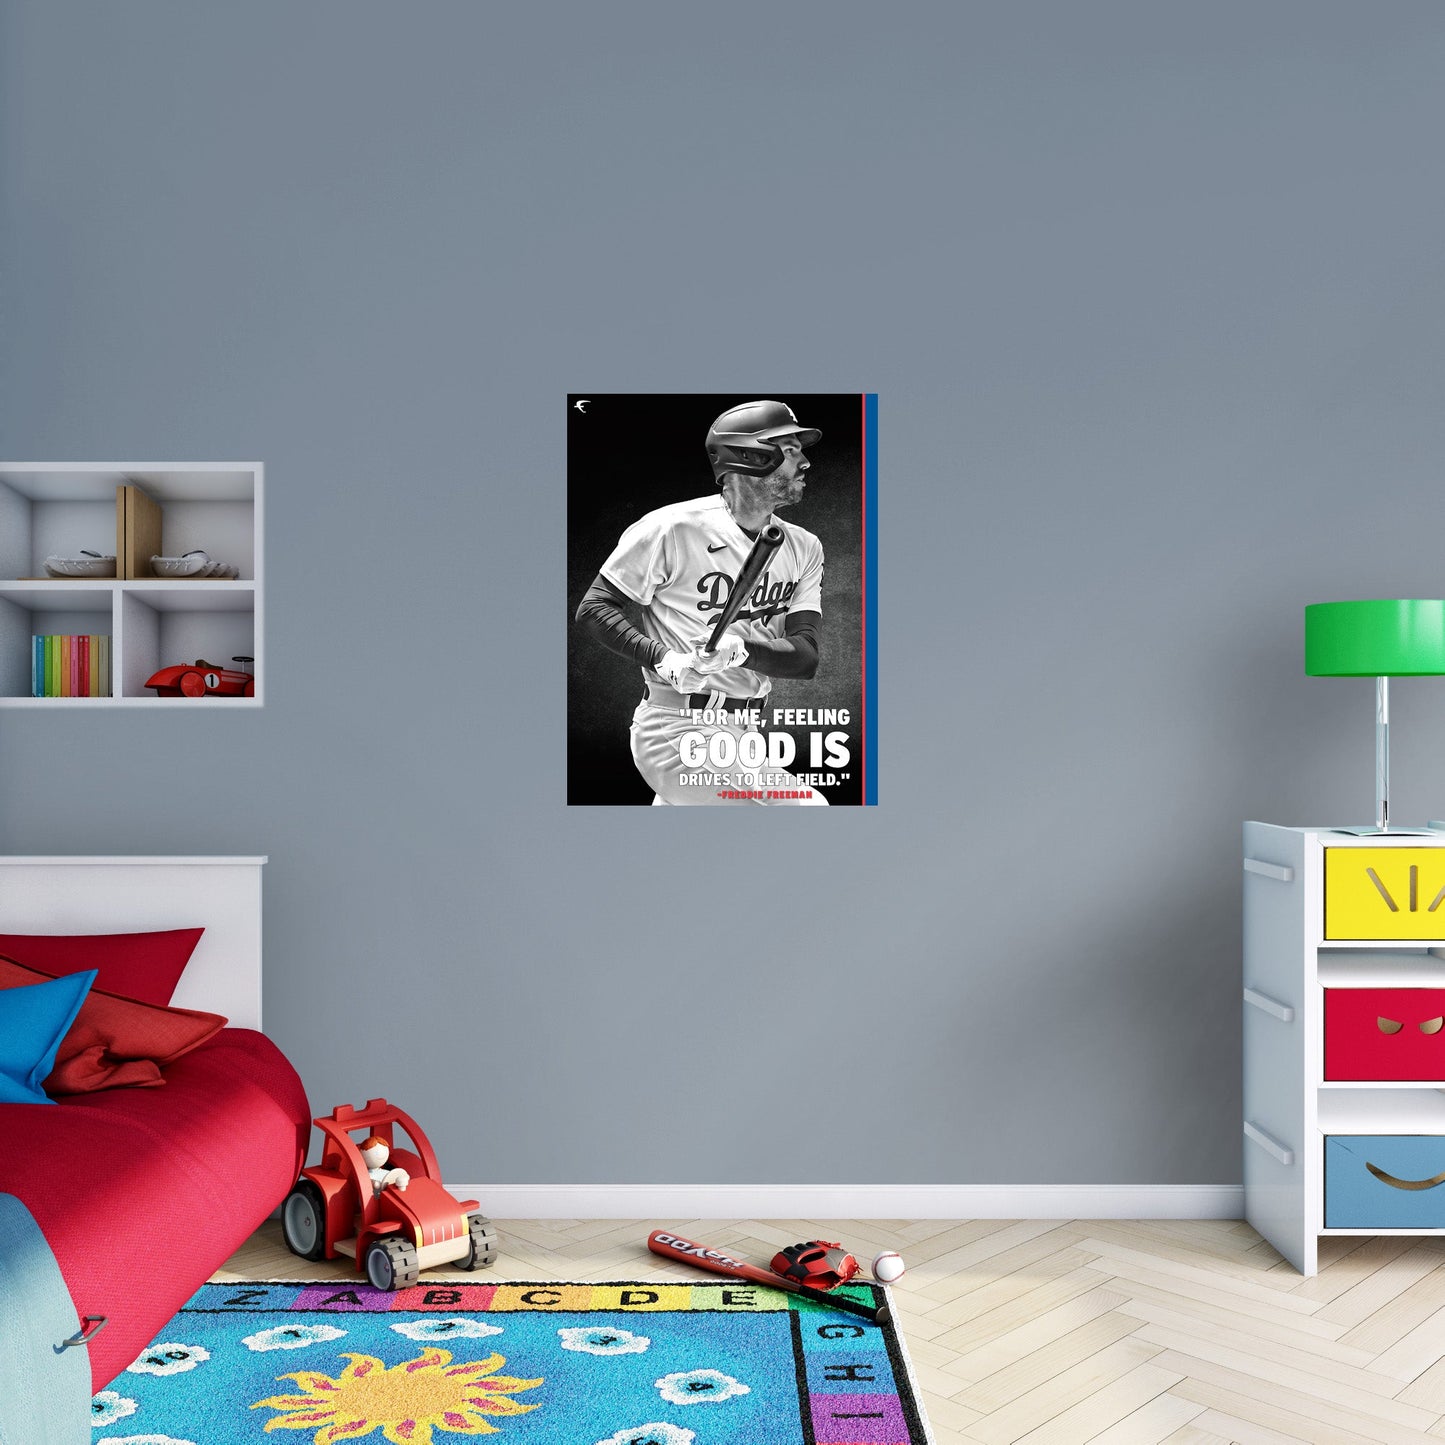 Los Angeles Dodgers: Freddie Freeman Inspirational Poster - Officially Licensed MLB Removable Adhesive Decal